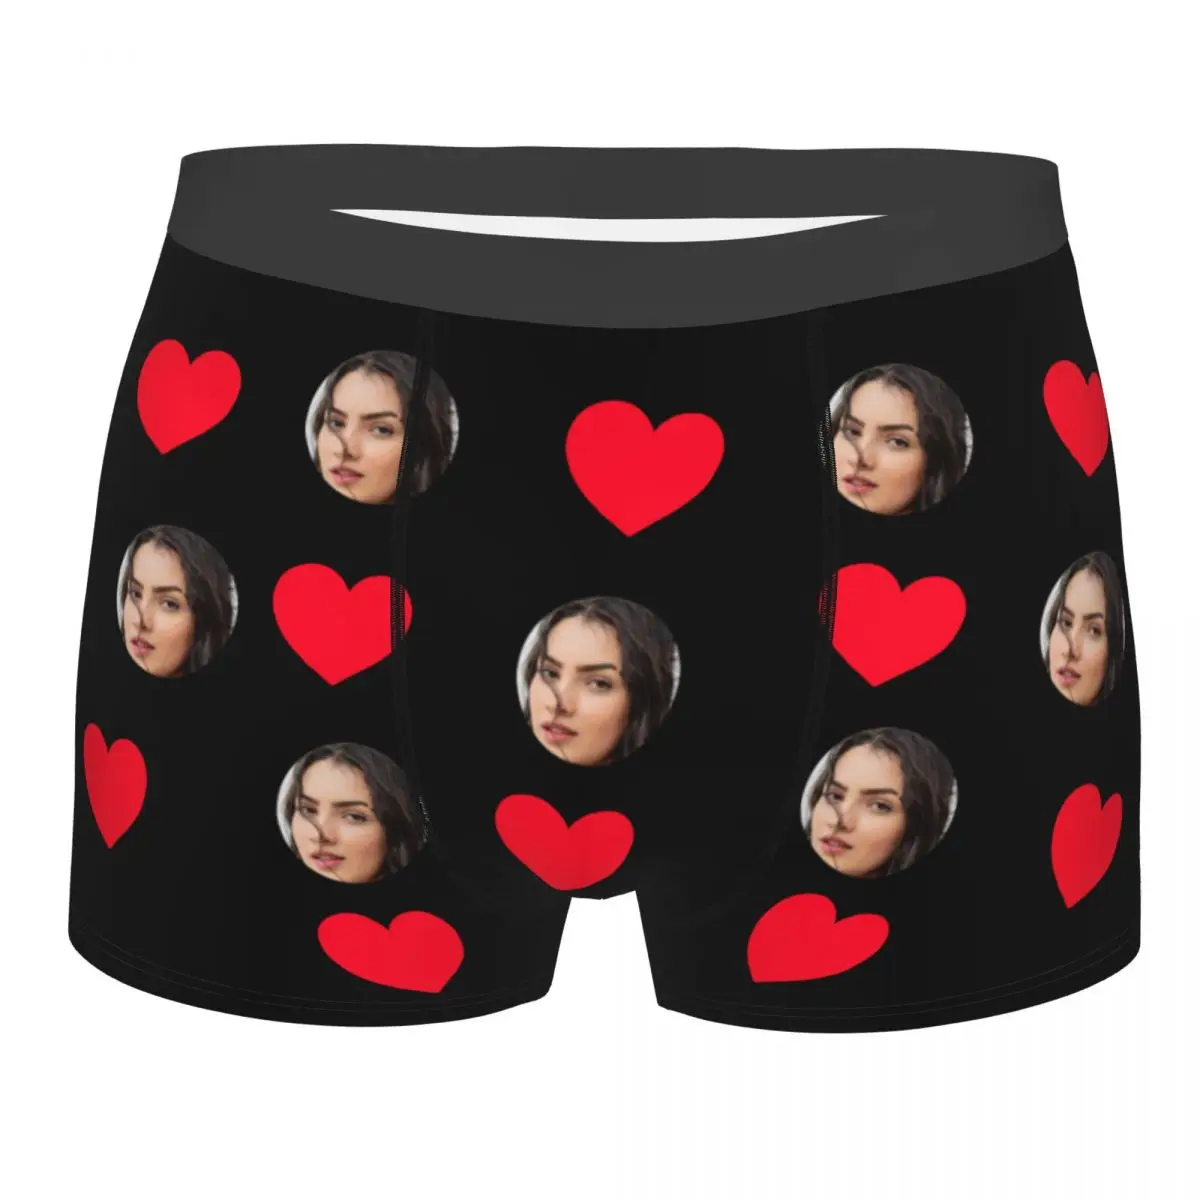 

Personalized Men's Boxer Briefs Girlfriends Wife Faces Photo Novelty Couples Panties Valentine's Gift for Boyfriend Shorts